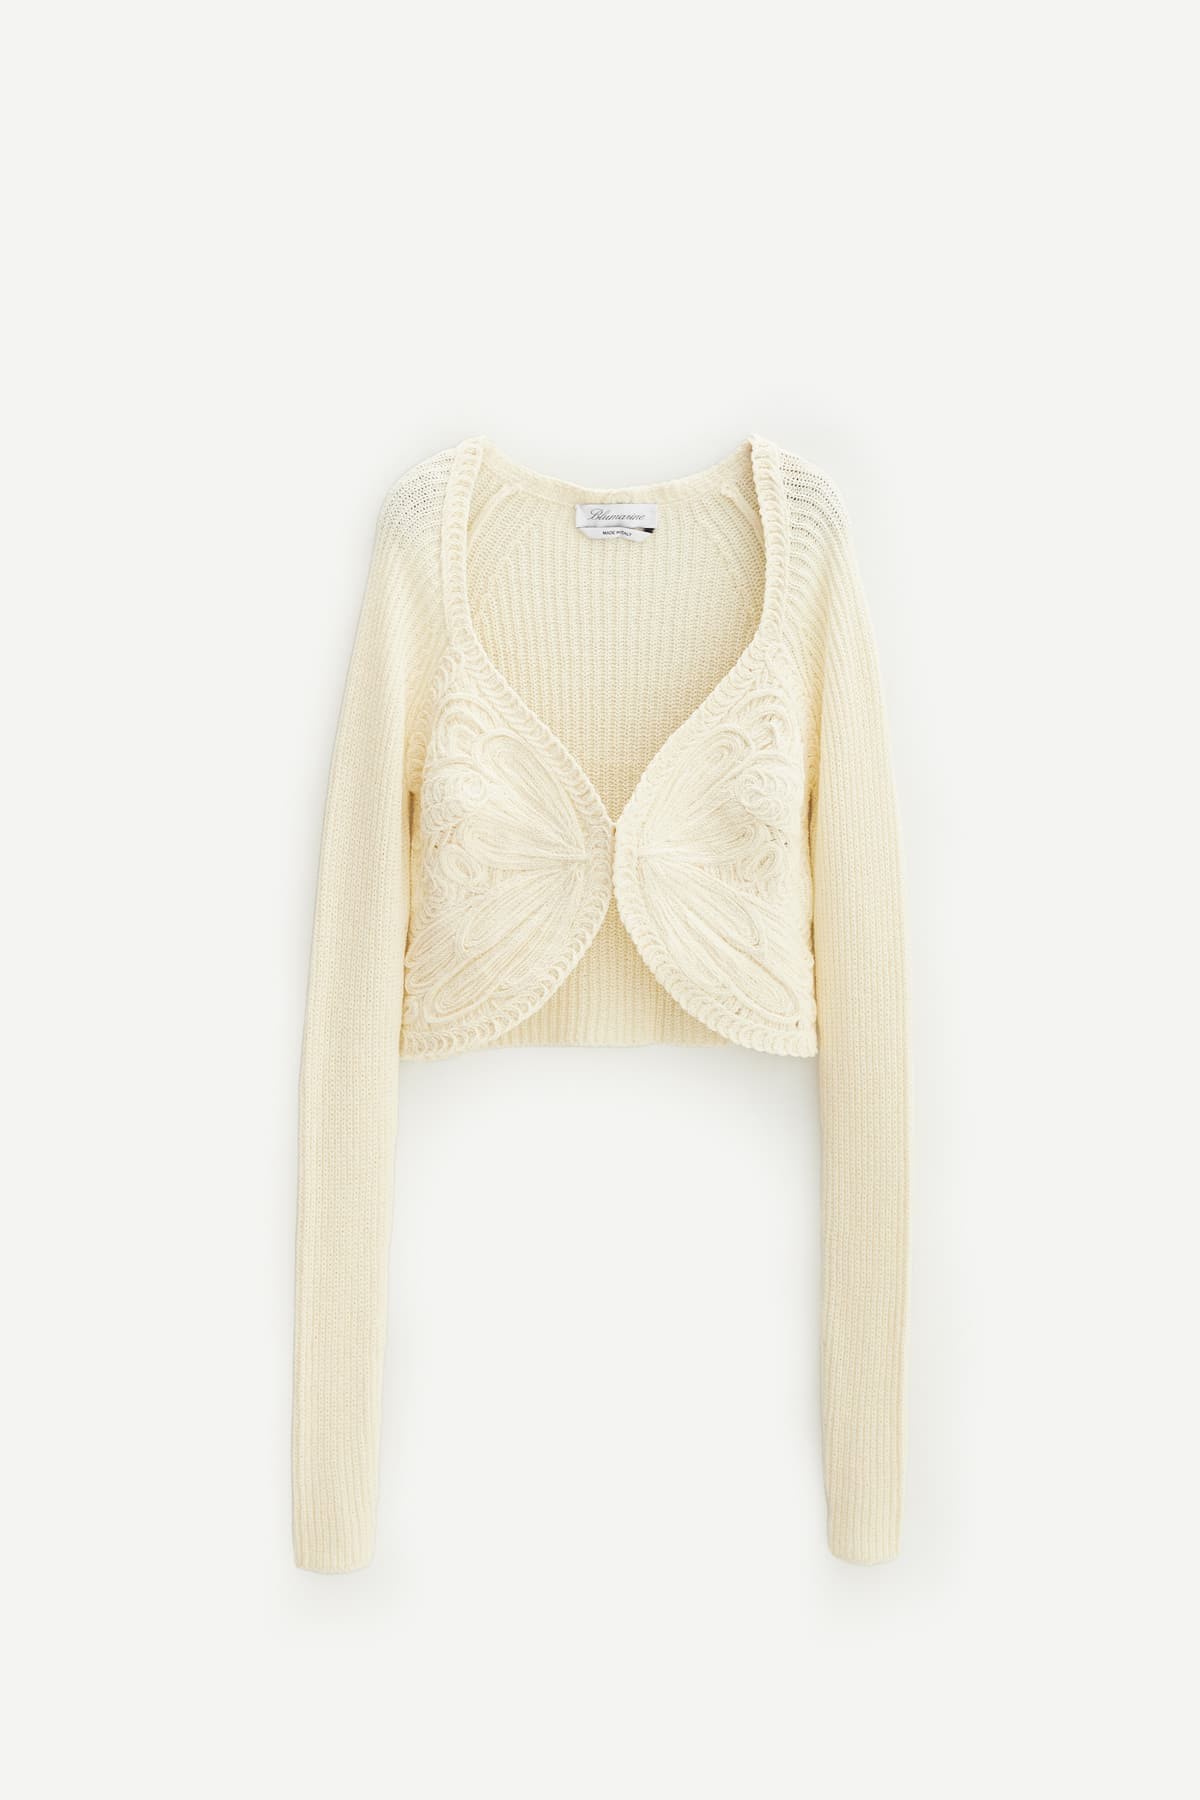 BLUMARINE OFF WHITE EMBROIDERY BUTTERFLY CROPPED CARDIGAN IAMNUE